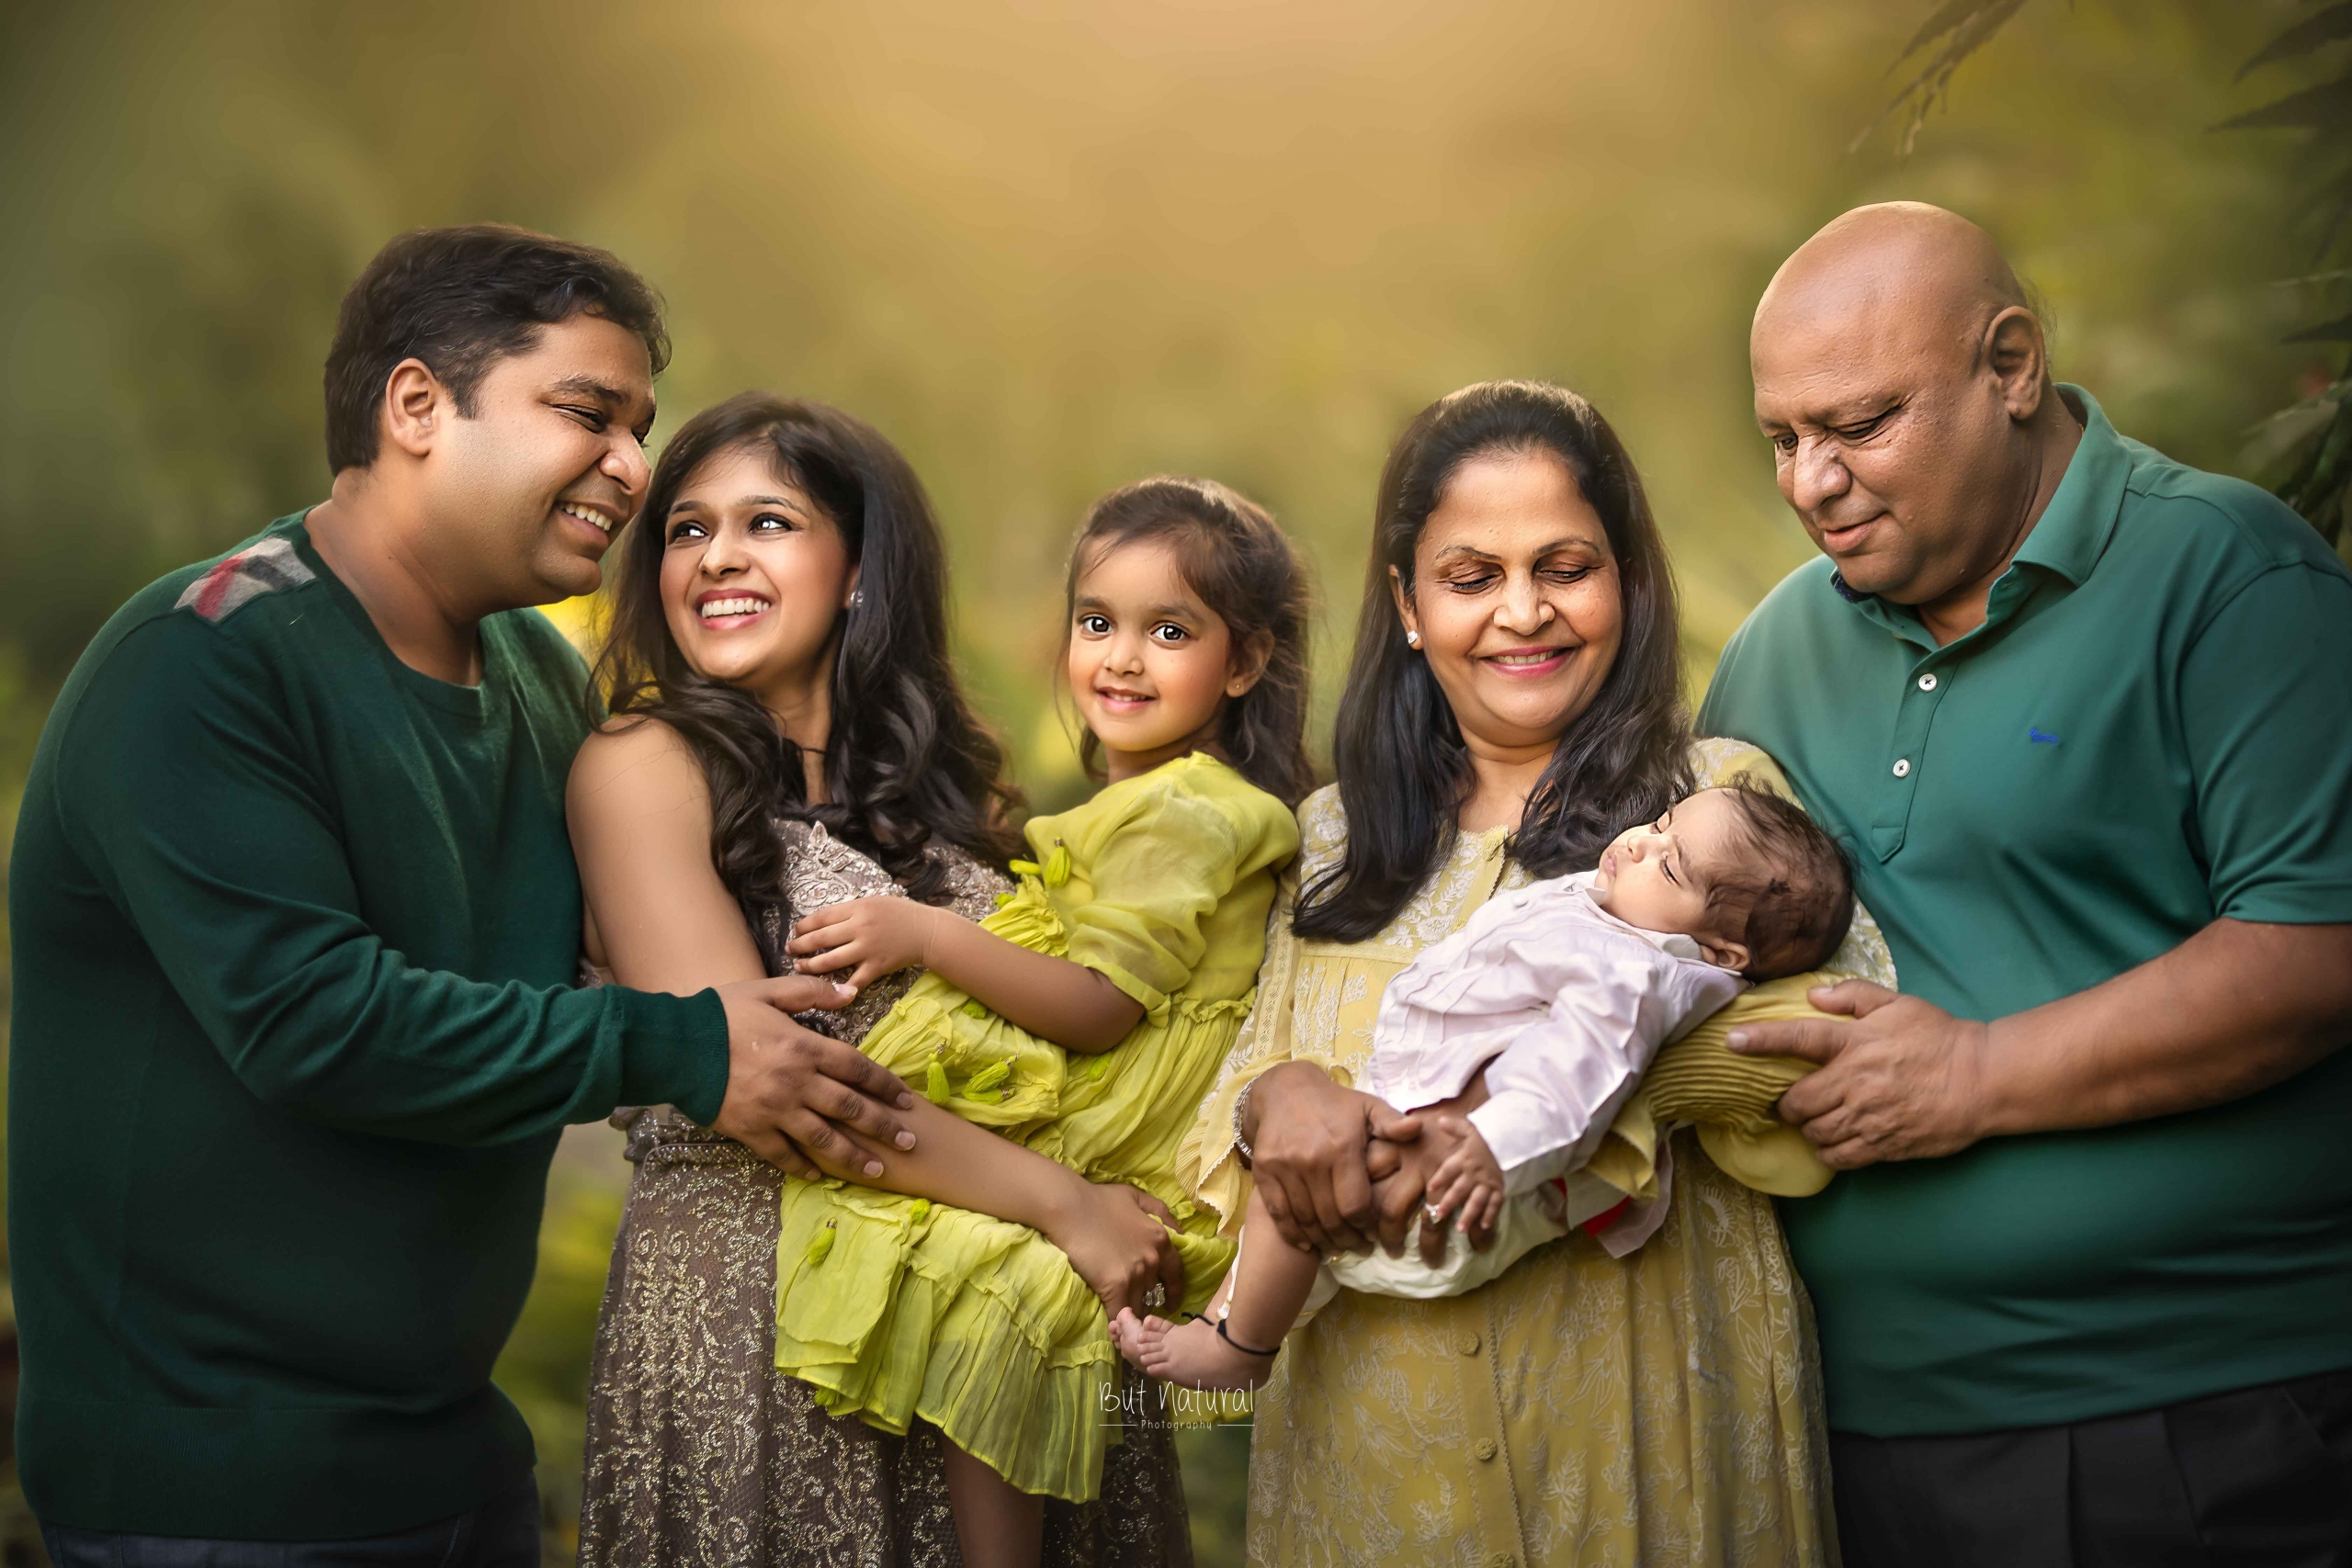 5 REASONS WHY A FAMILY PHOTO SHOOT IS WORTH DOING